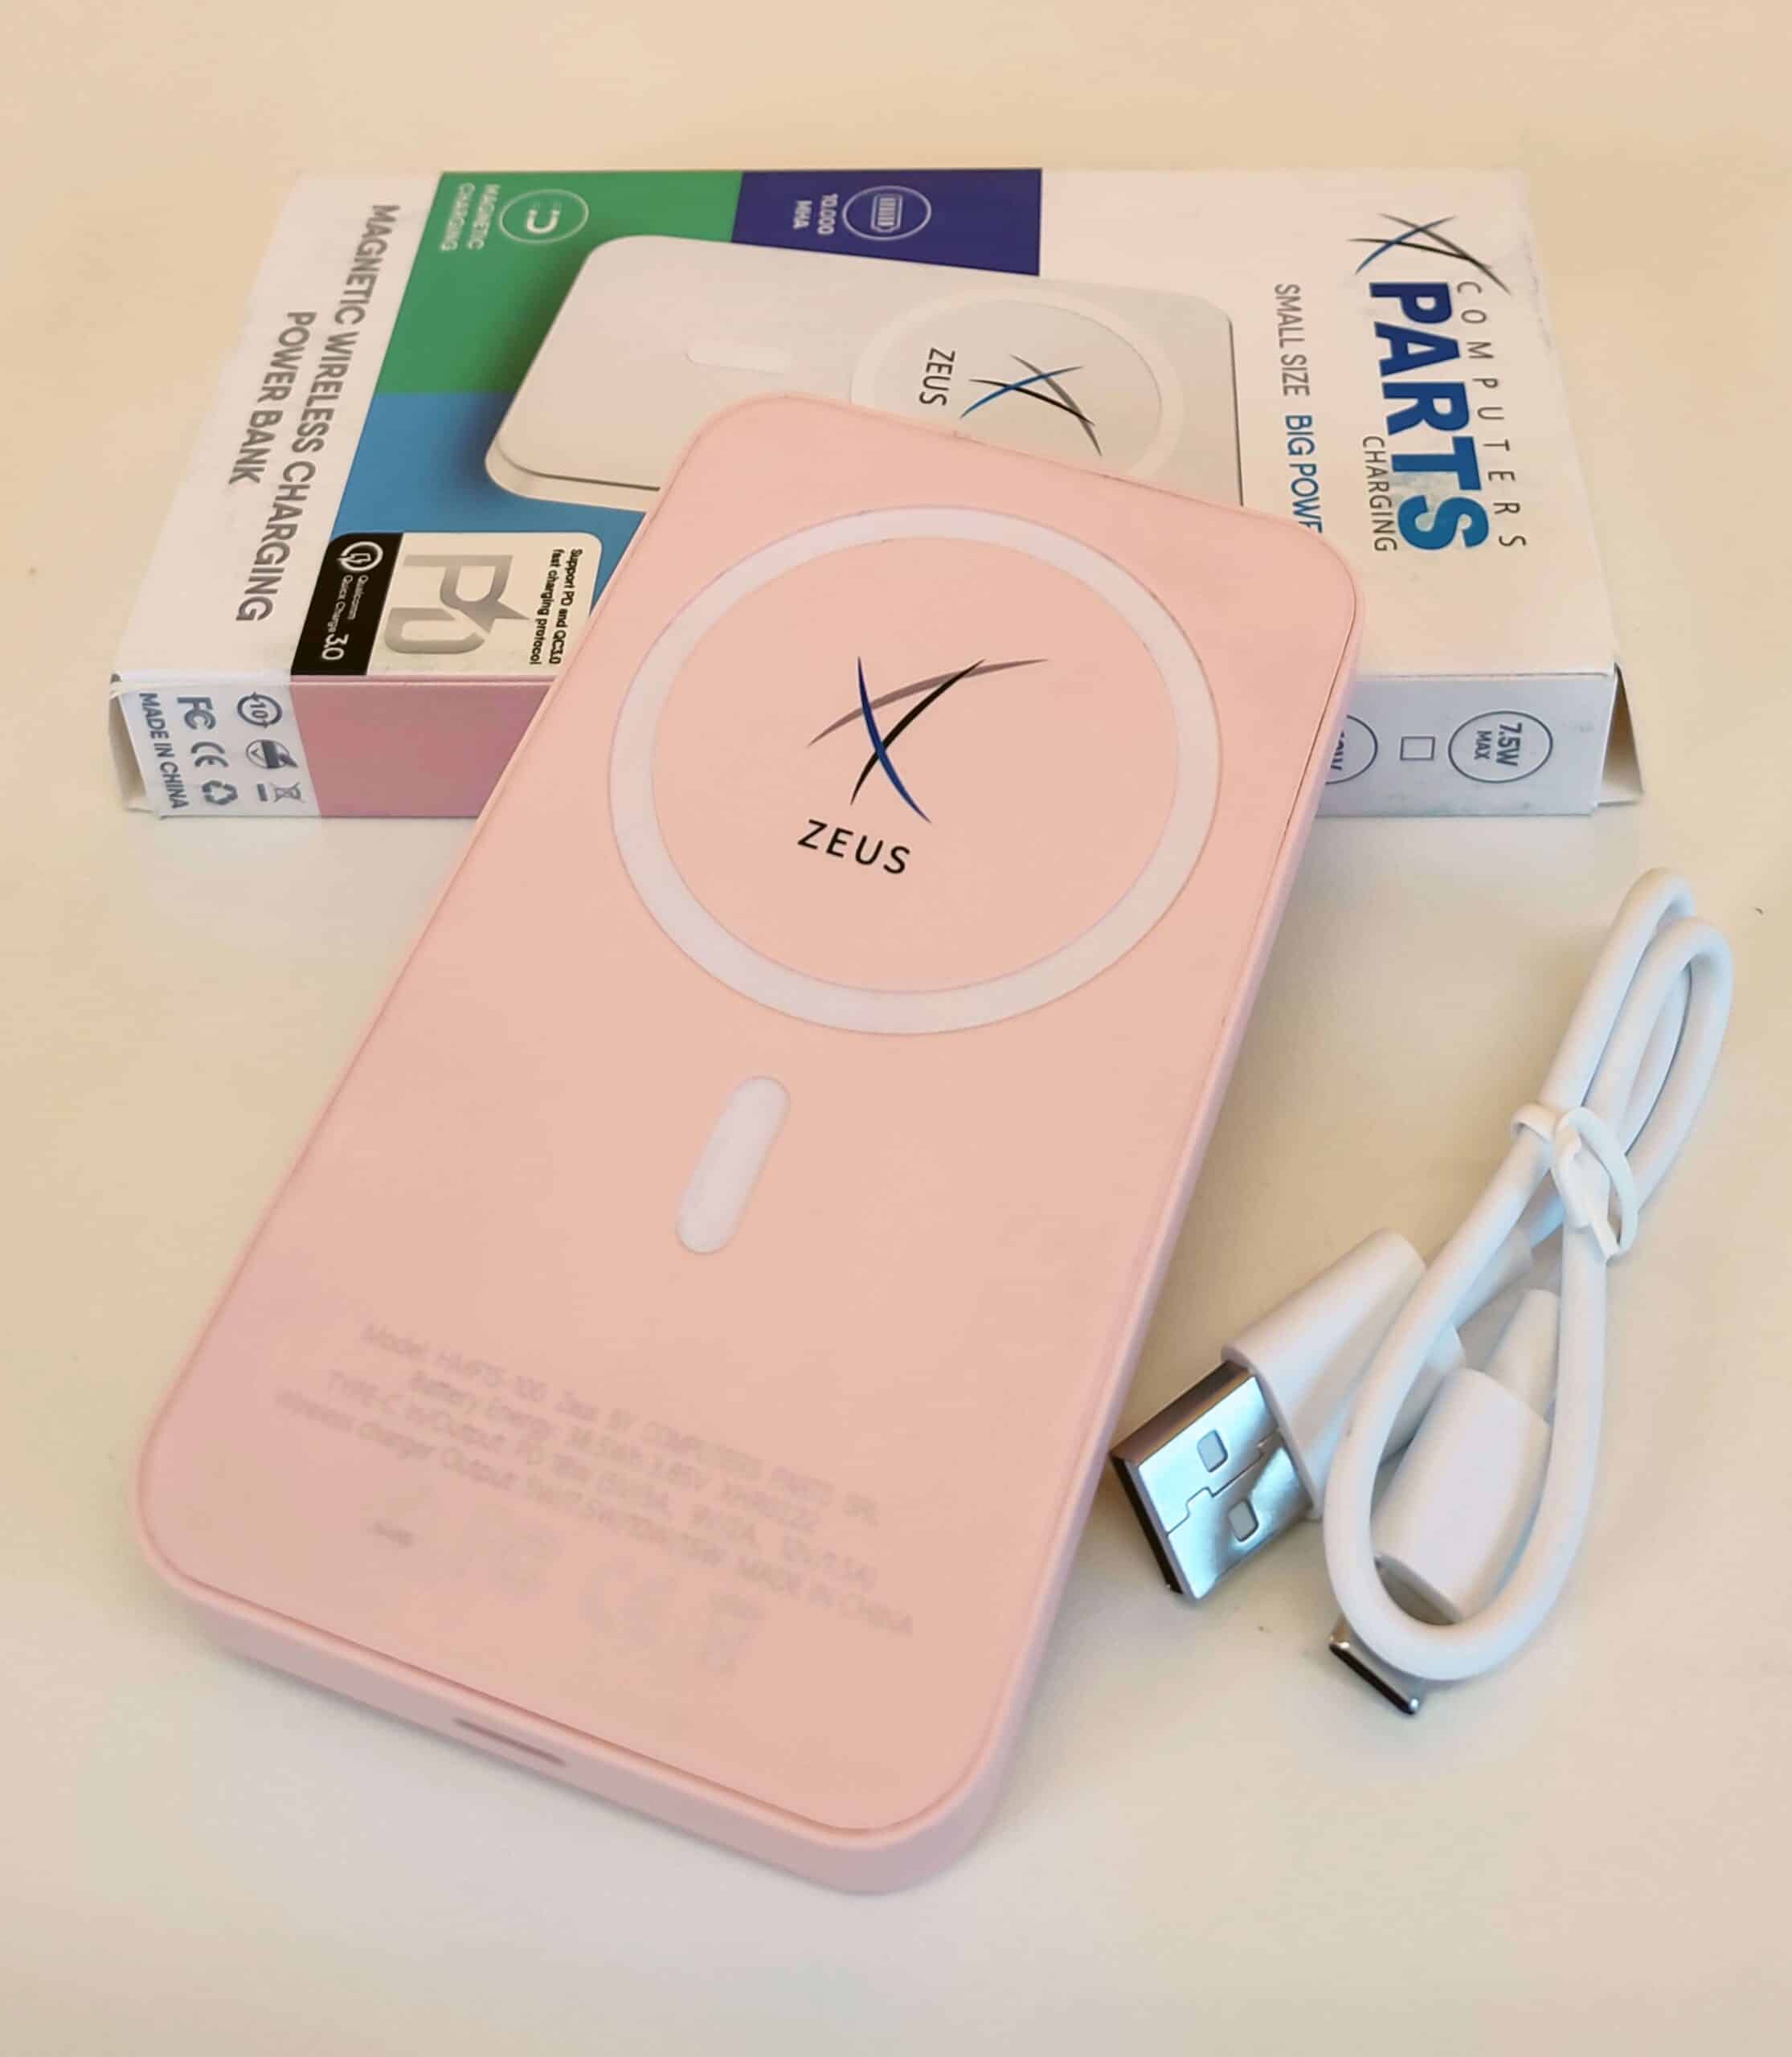 Zeus Power Bank MagSafe 10,000 mAh Wireless Charging Qualcomm Quick Charge 3.0 Compatible with Iphone Samsung Xiaomi Huawei